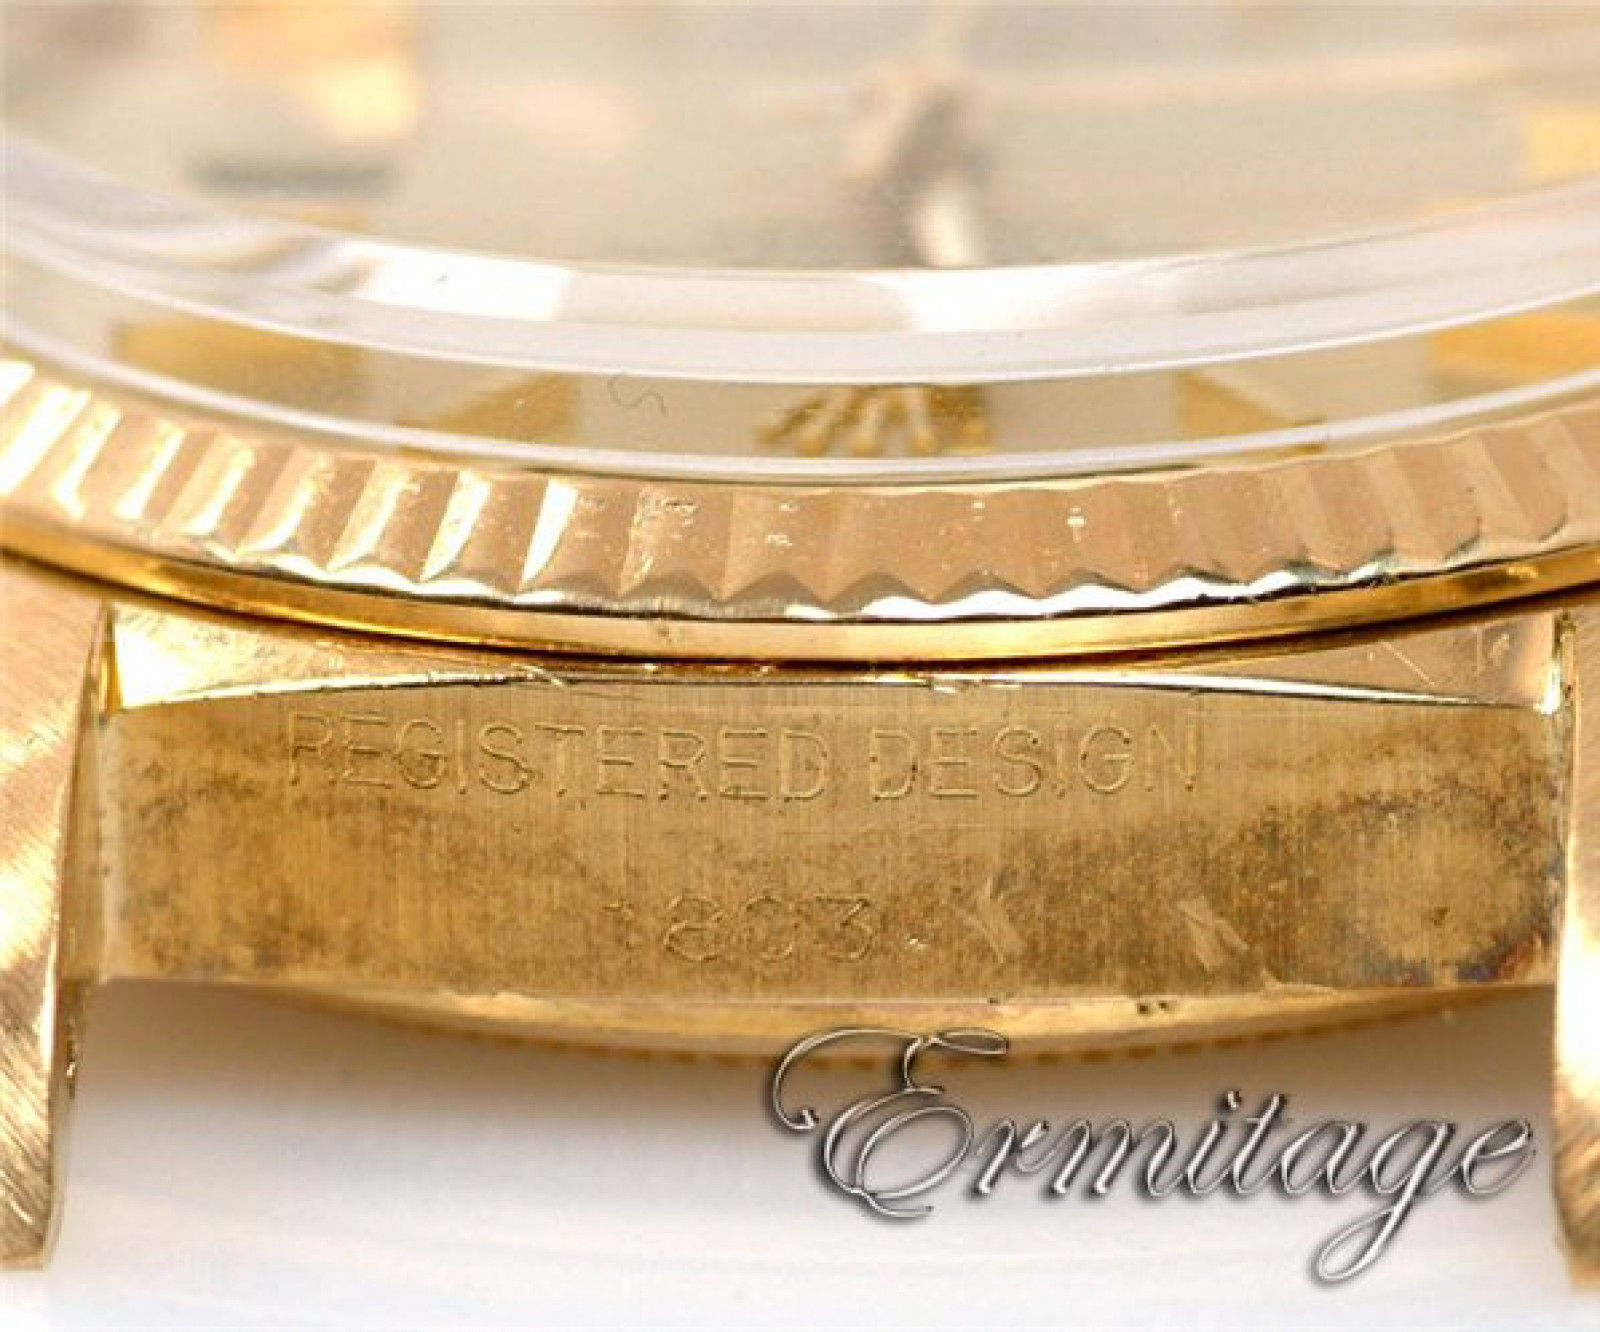 Vintage Rolex Day-Date 1803 Gold Silver 1974